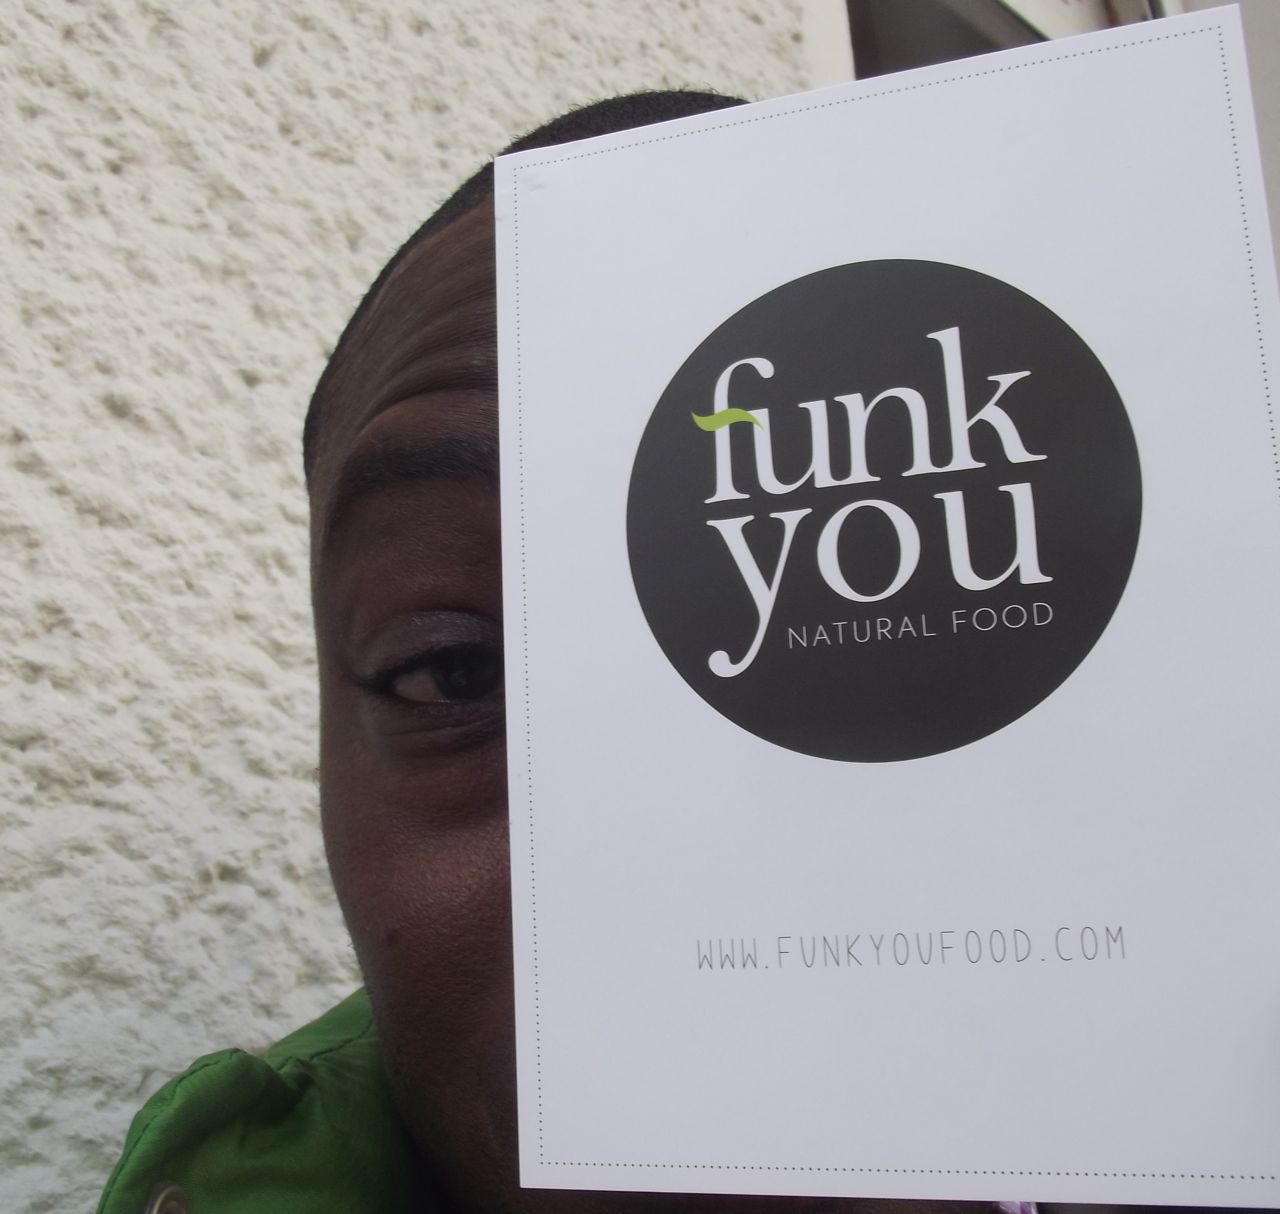 Read more about the article <!--:en-->“Funk You”The Cafe/Juice Bar for the Healthy freak in you!!!!<!--:-->